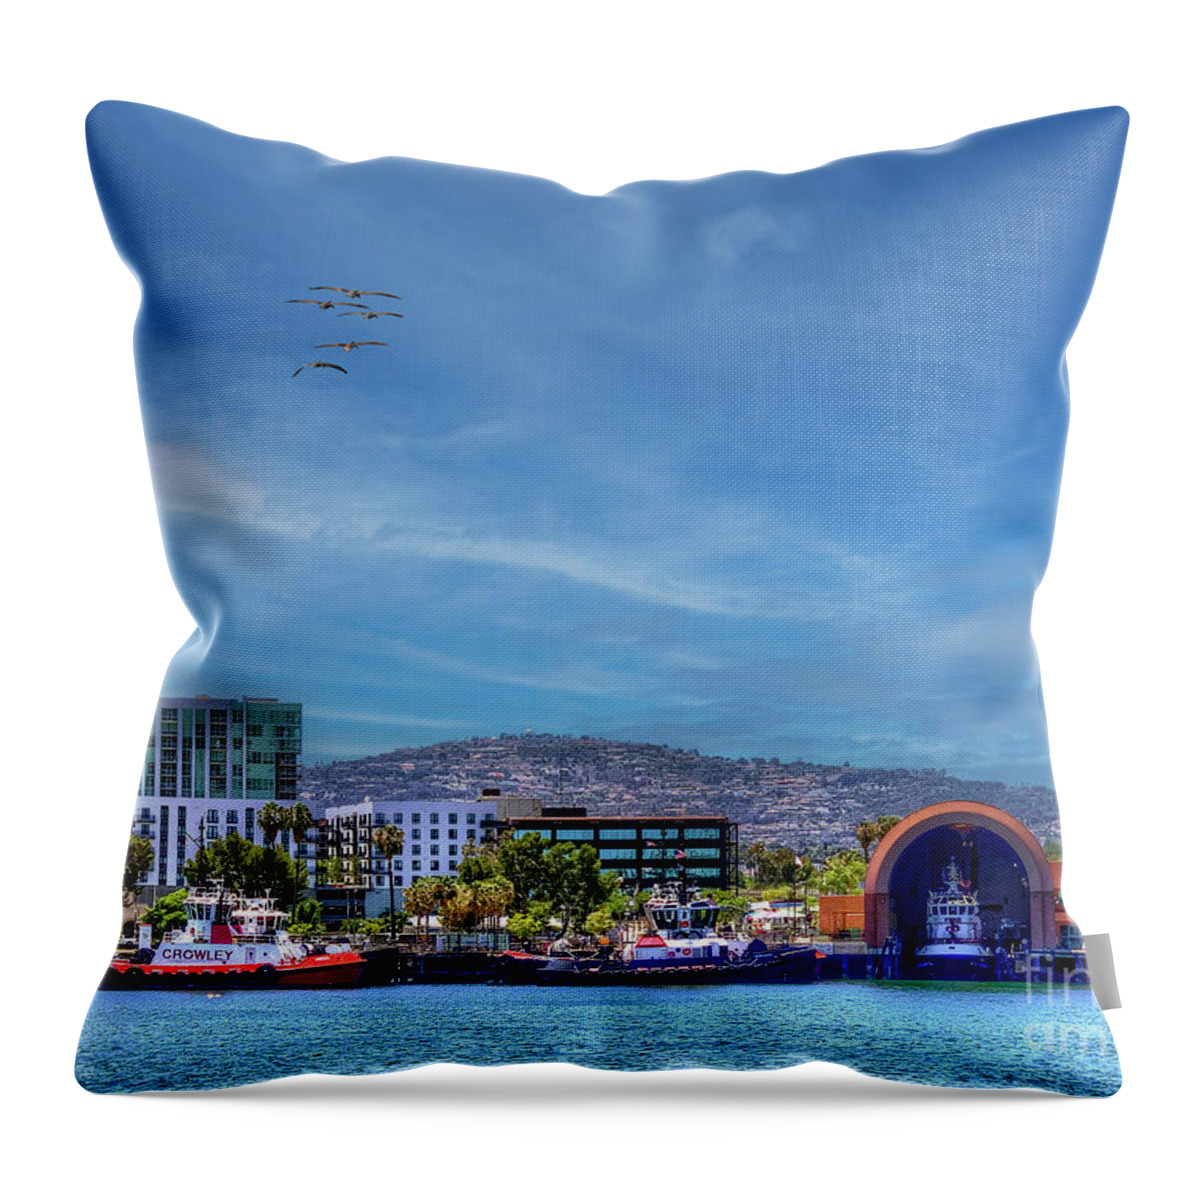 Fire Boats San Pedro Throw Pillow featuring the photograph Fire Boats San Pedro by David Zanzinger